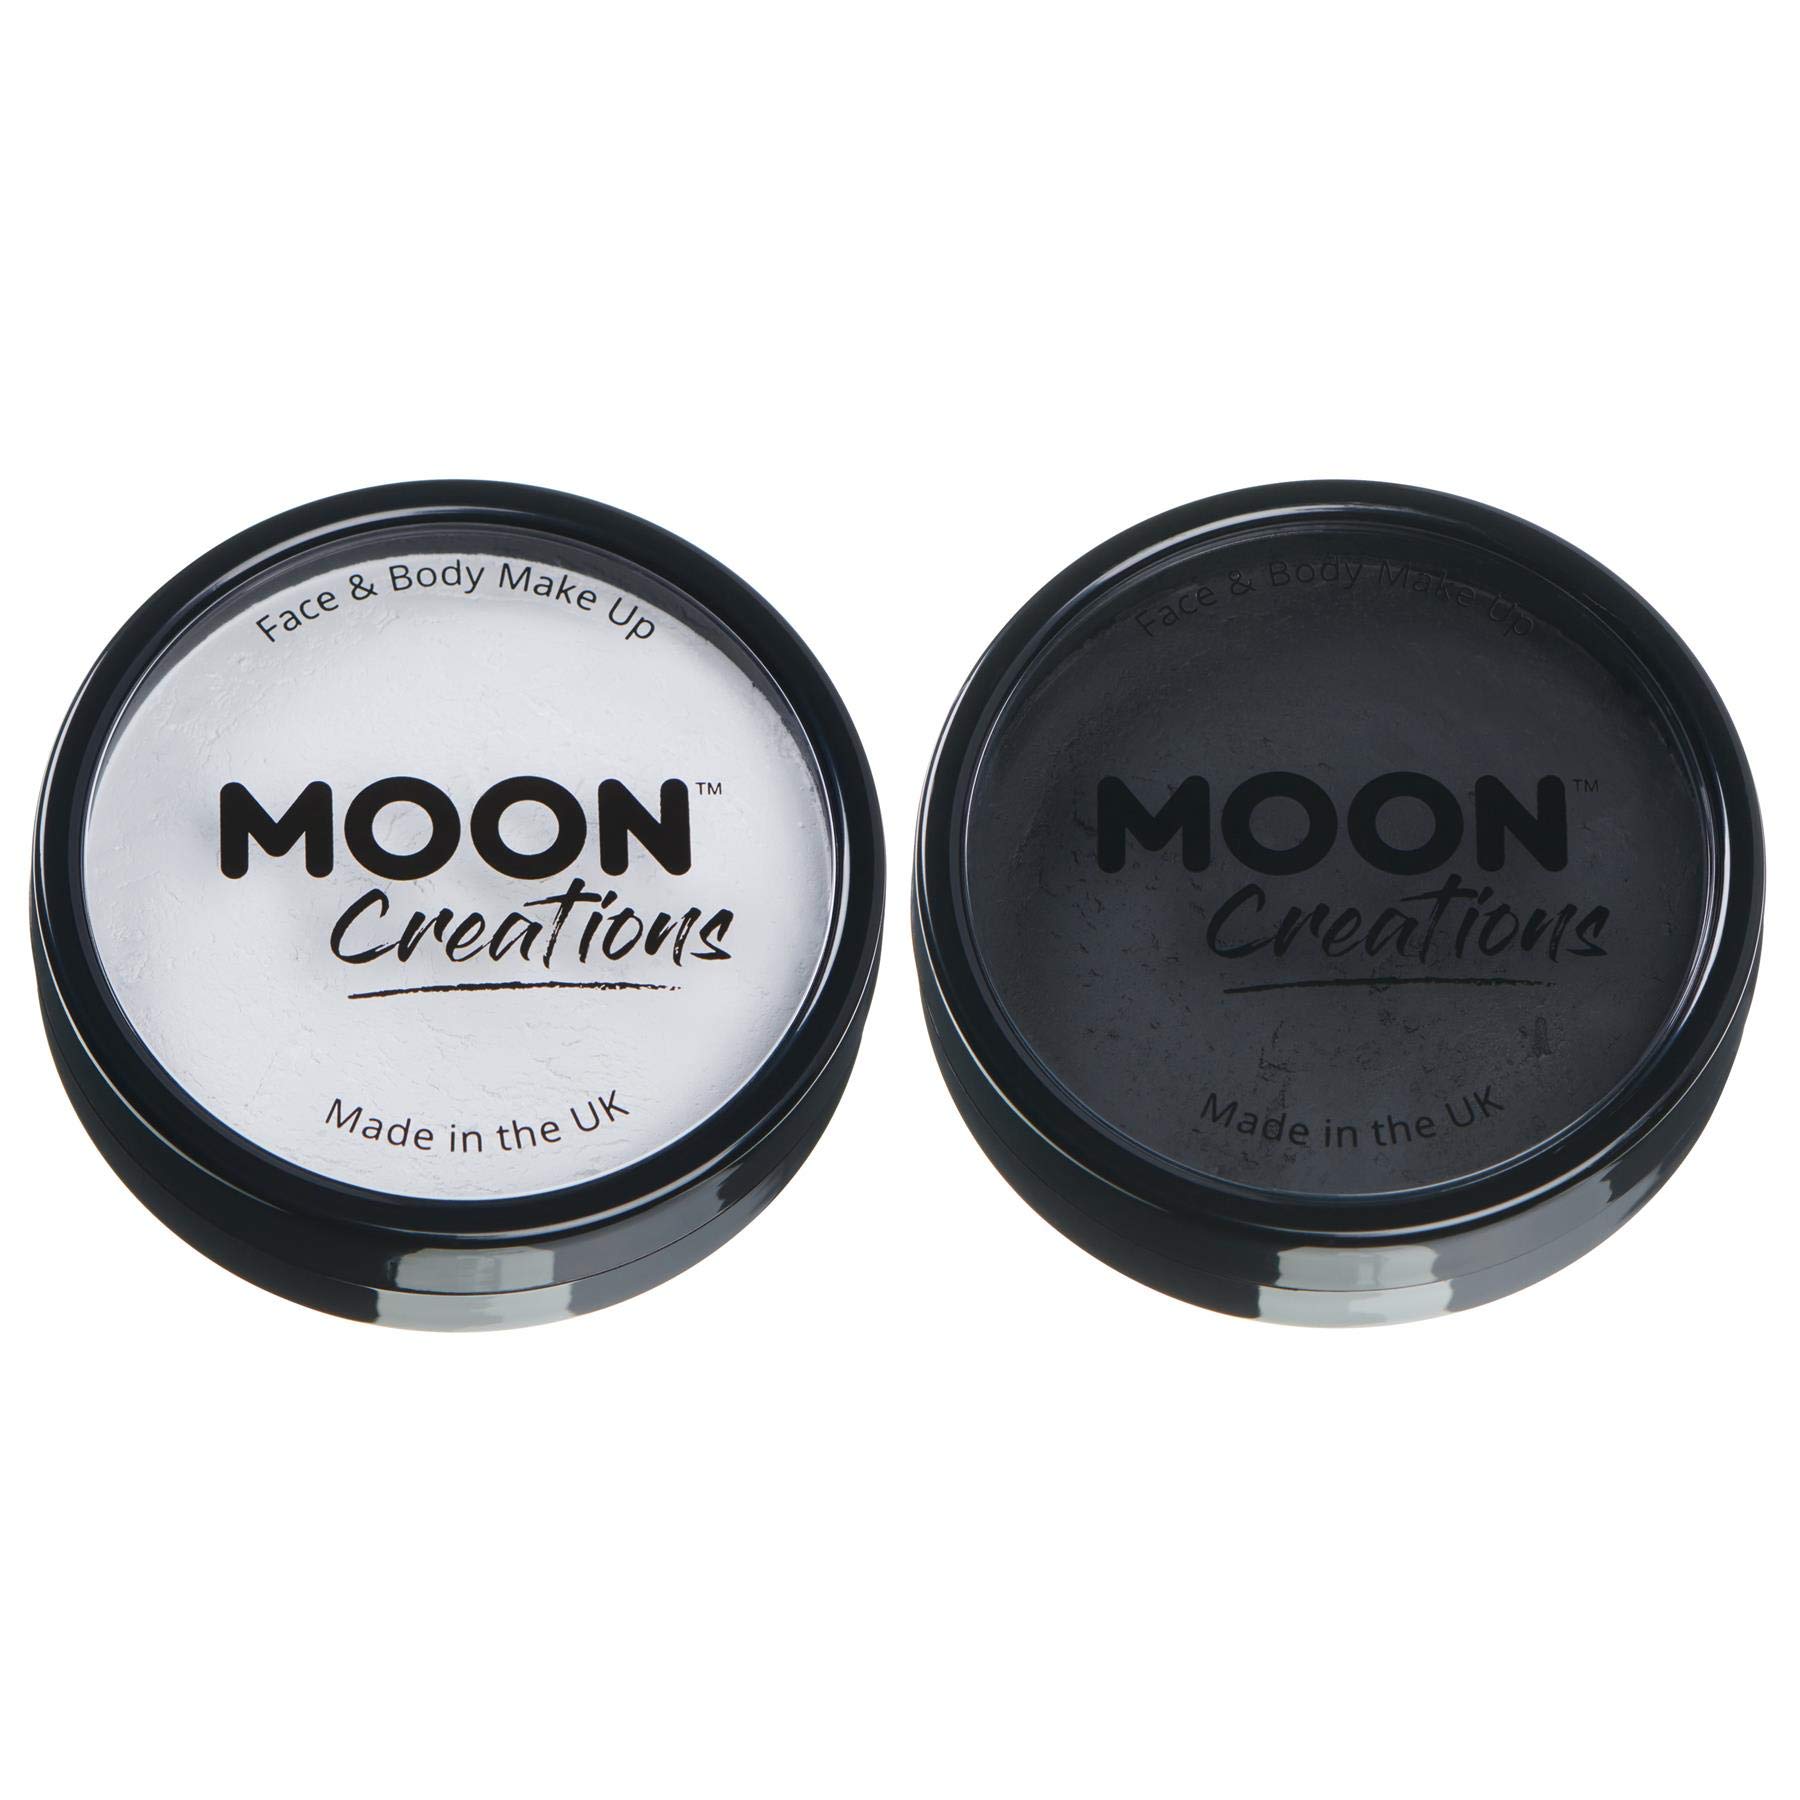 Pro Face & Body Paint Cake Pots by Moon Creations - Monochrome Colours Set - Professional Water Based Face Paint Makeup for Adults, Kids - 1.26oz